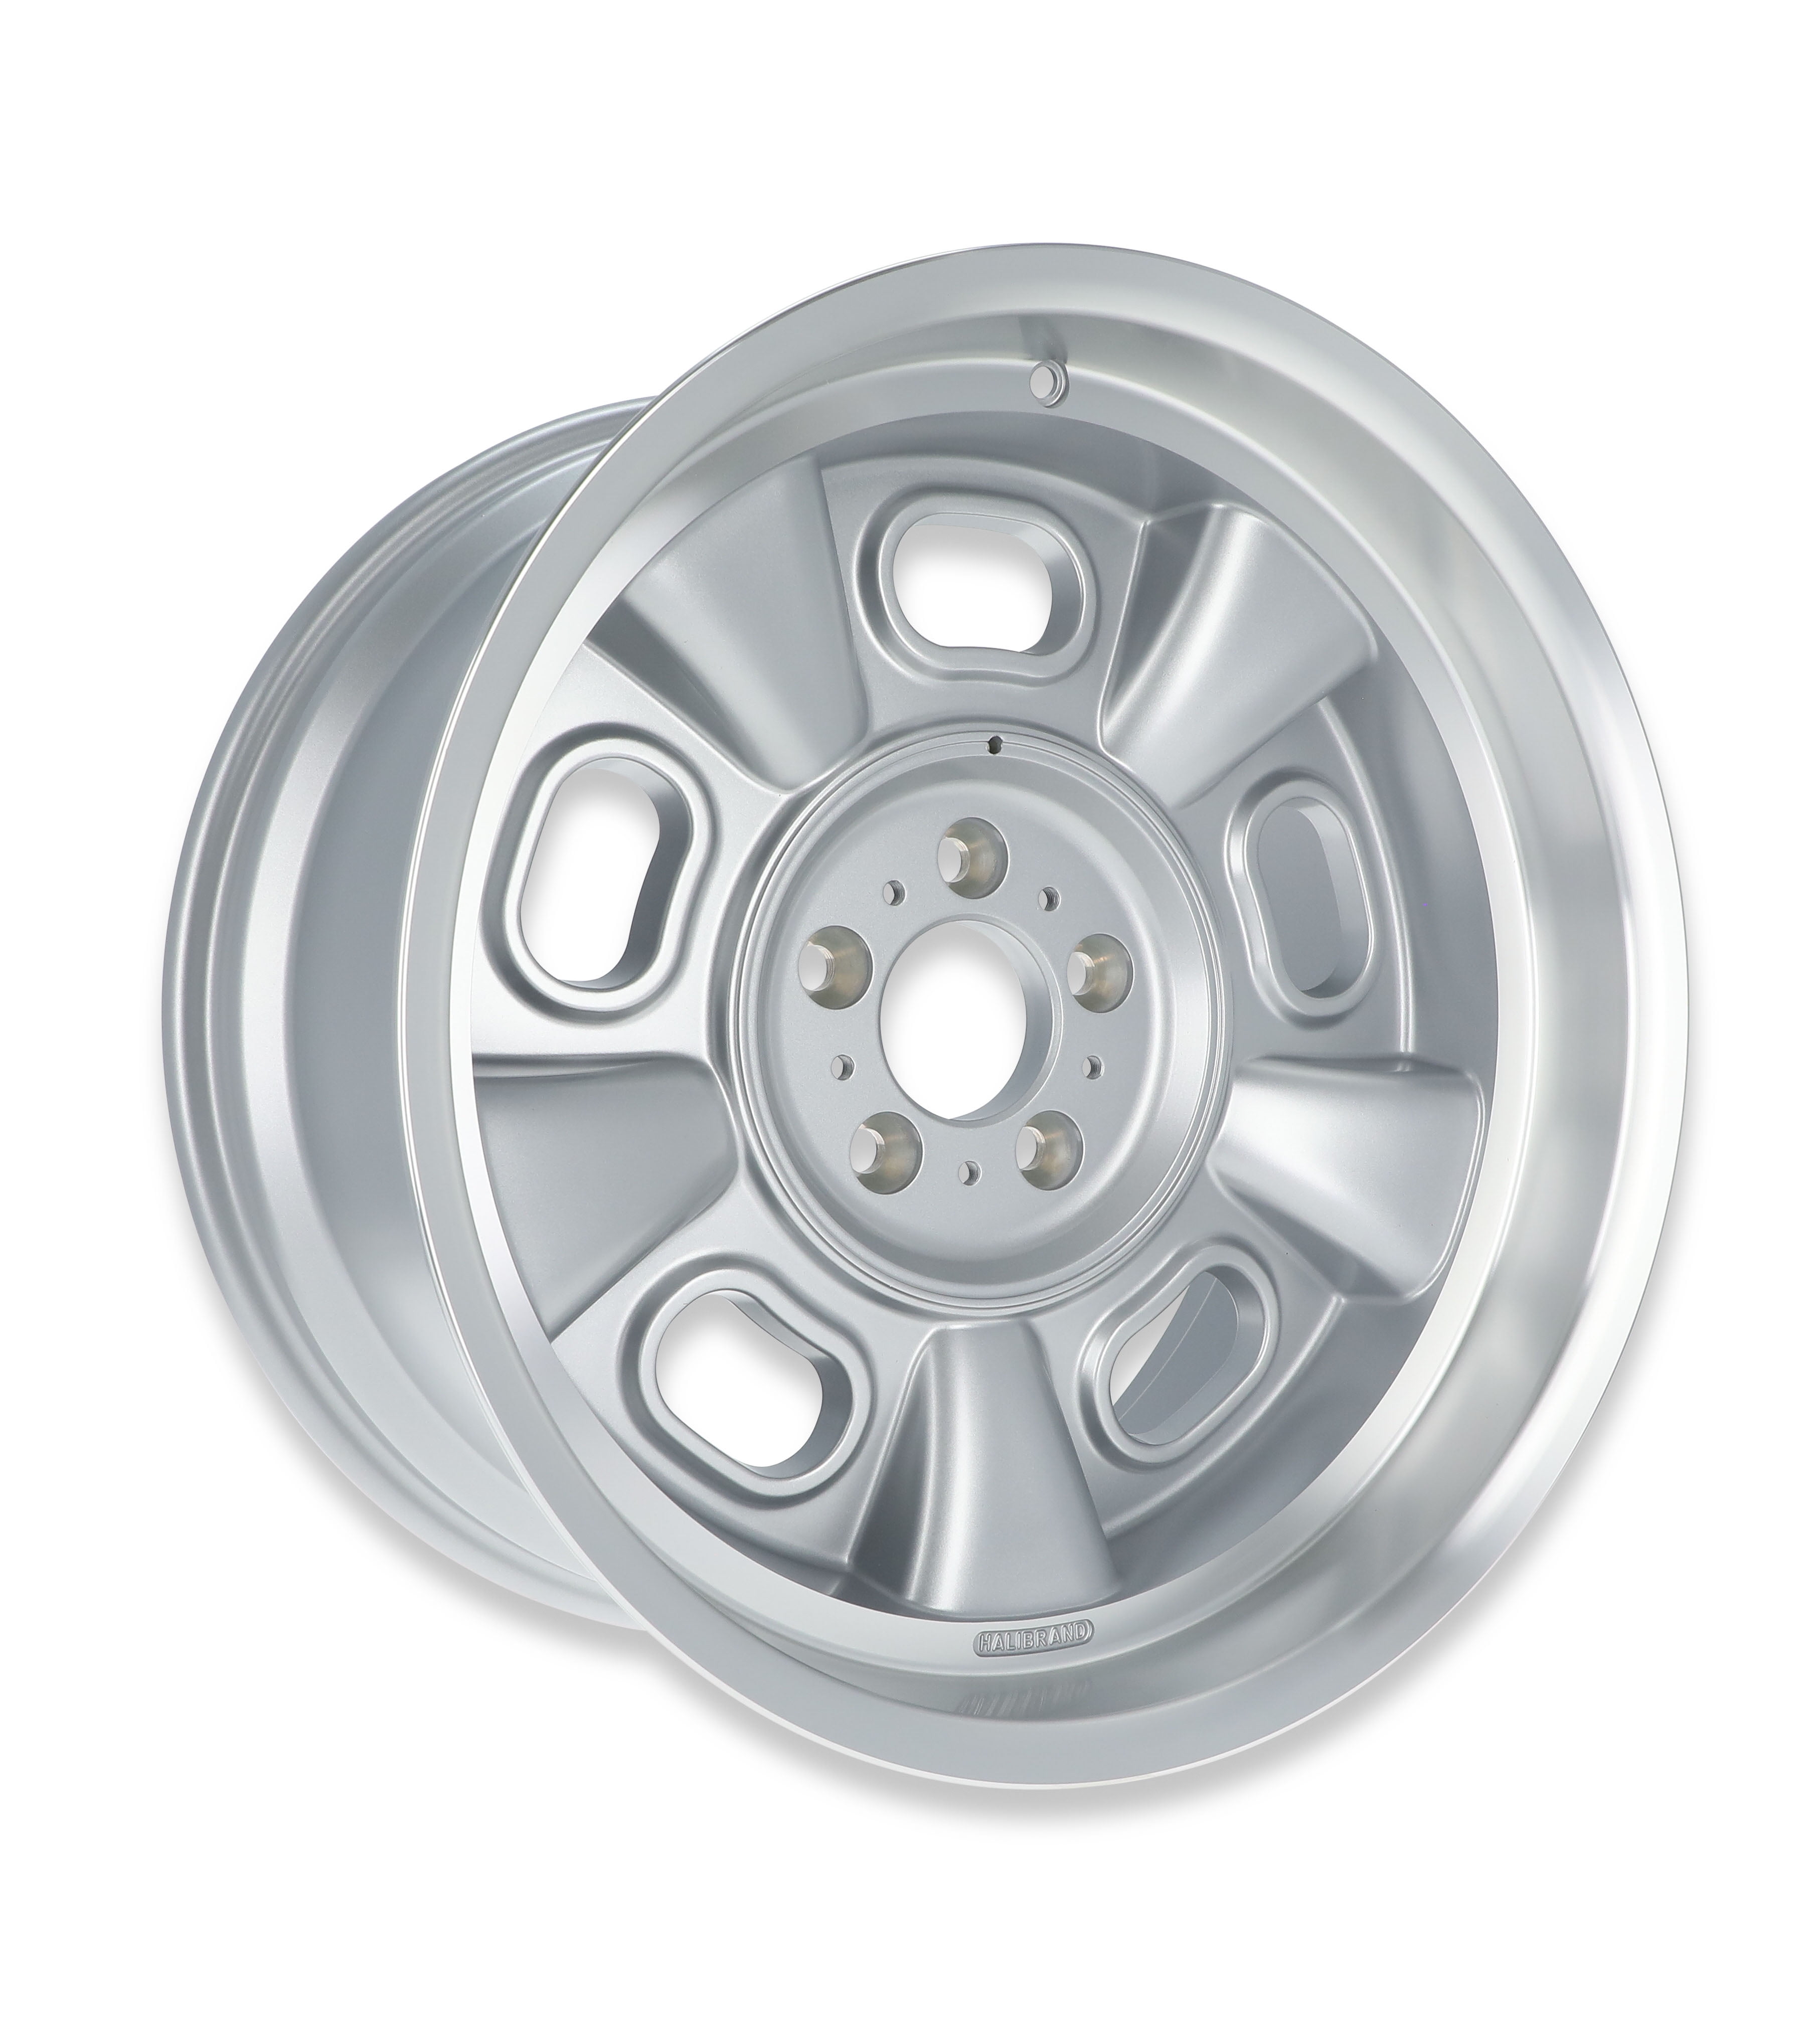 Halibrand HB002-009 Indy Roadster Wheel 20x10 - 5.5 BS Silver 